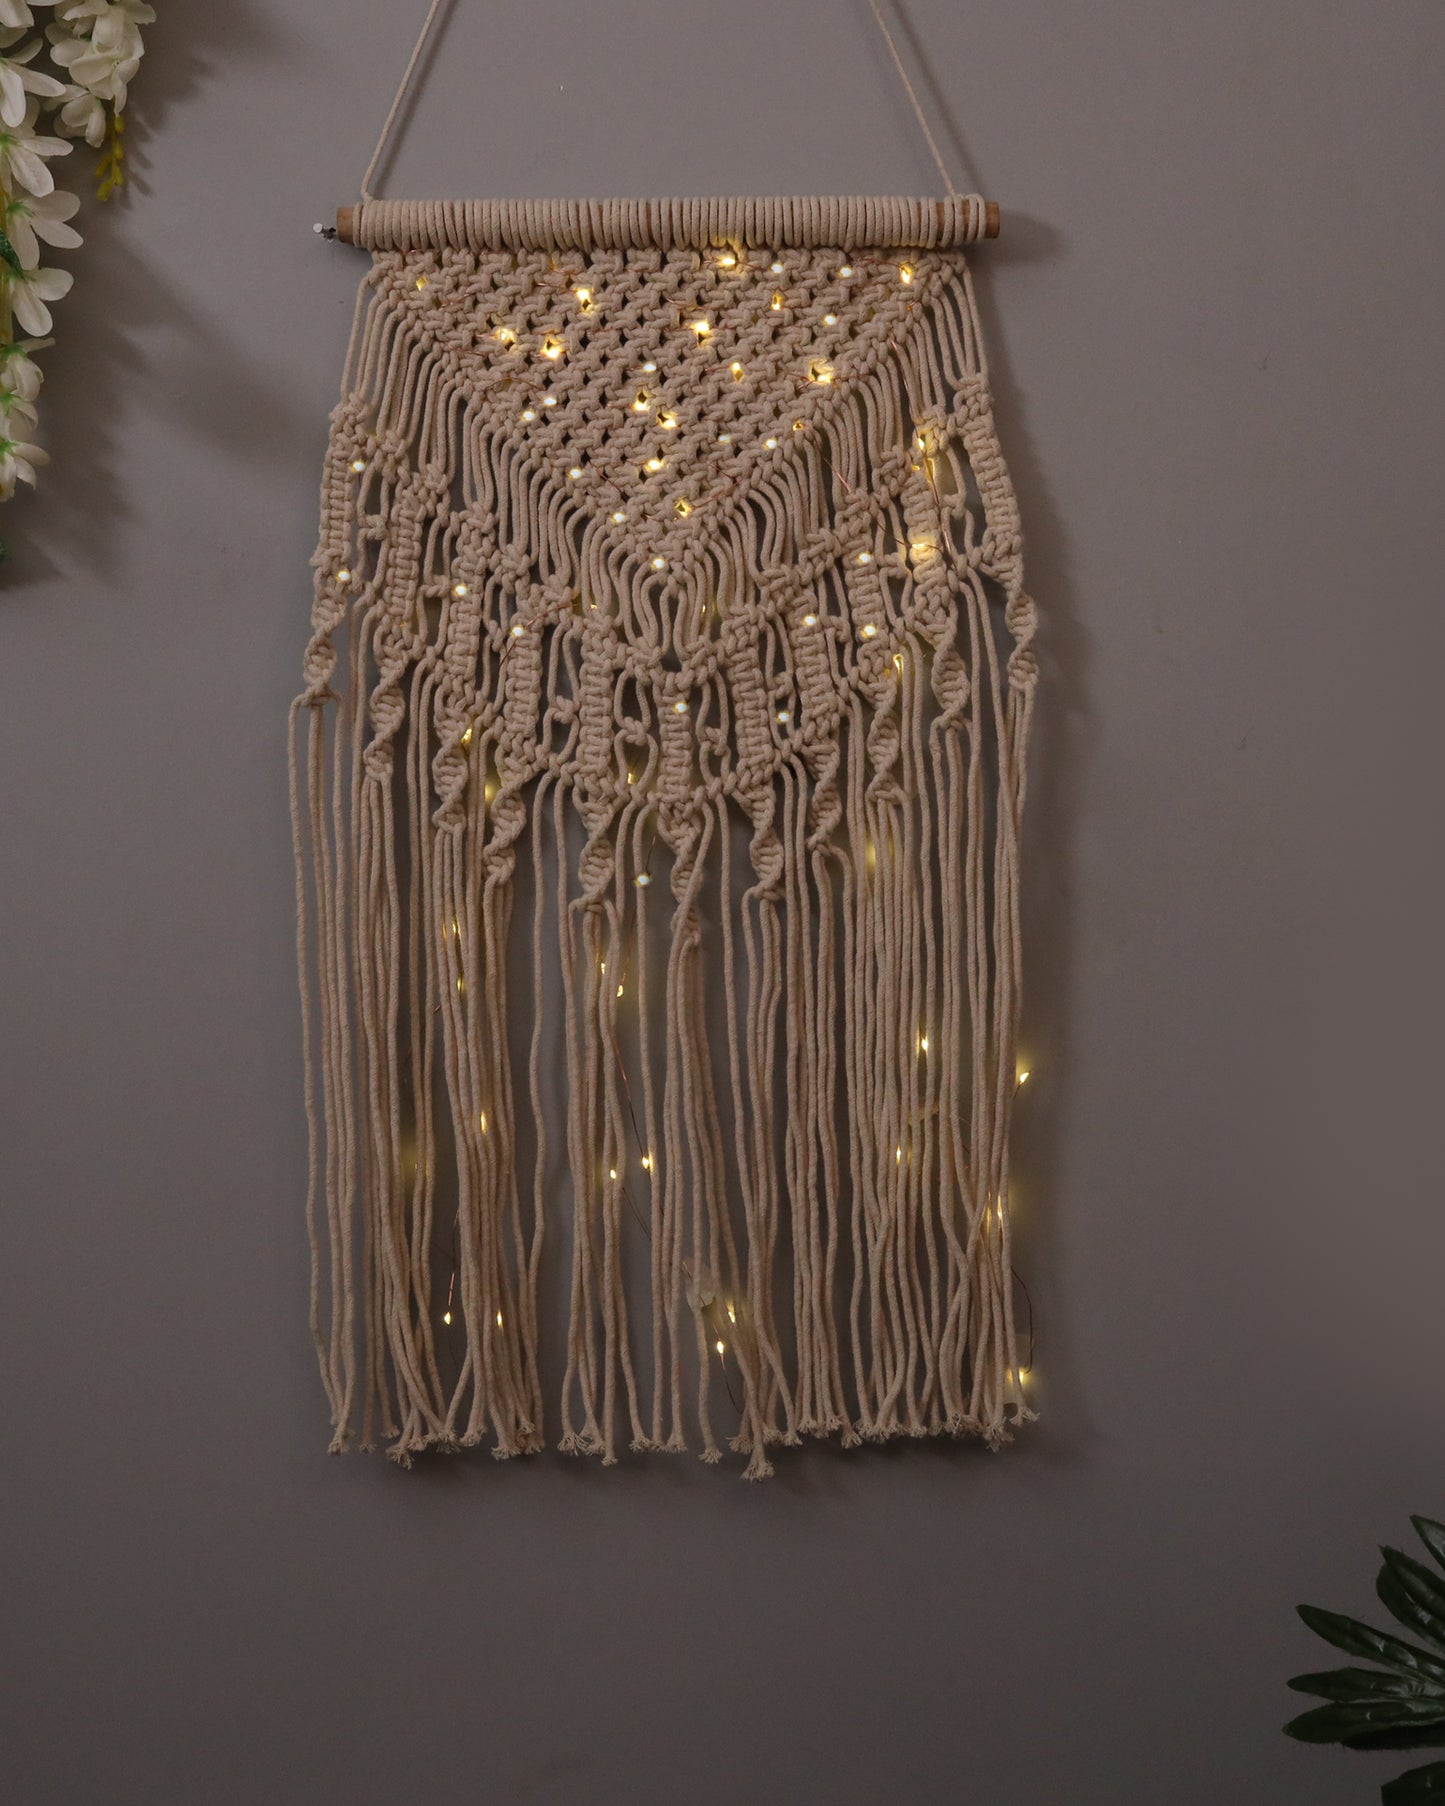 Macrame Wall Hanging Tapestry Tassel Home Decor Bohemian Handmade Chic Cotton Rope,Living Room, Balcony, Office, Housewarming, Garden, Single with String Light